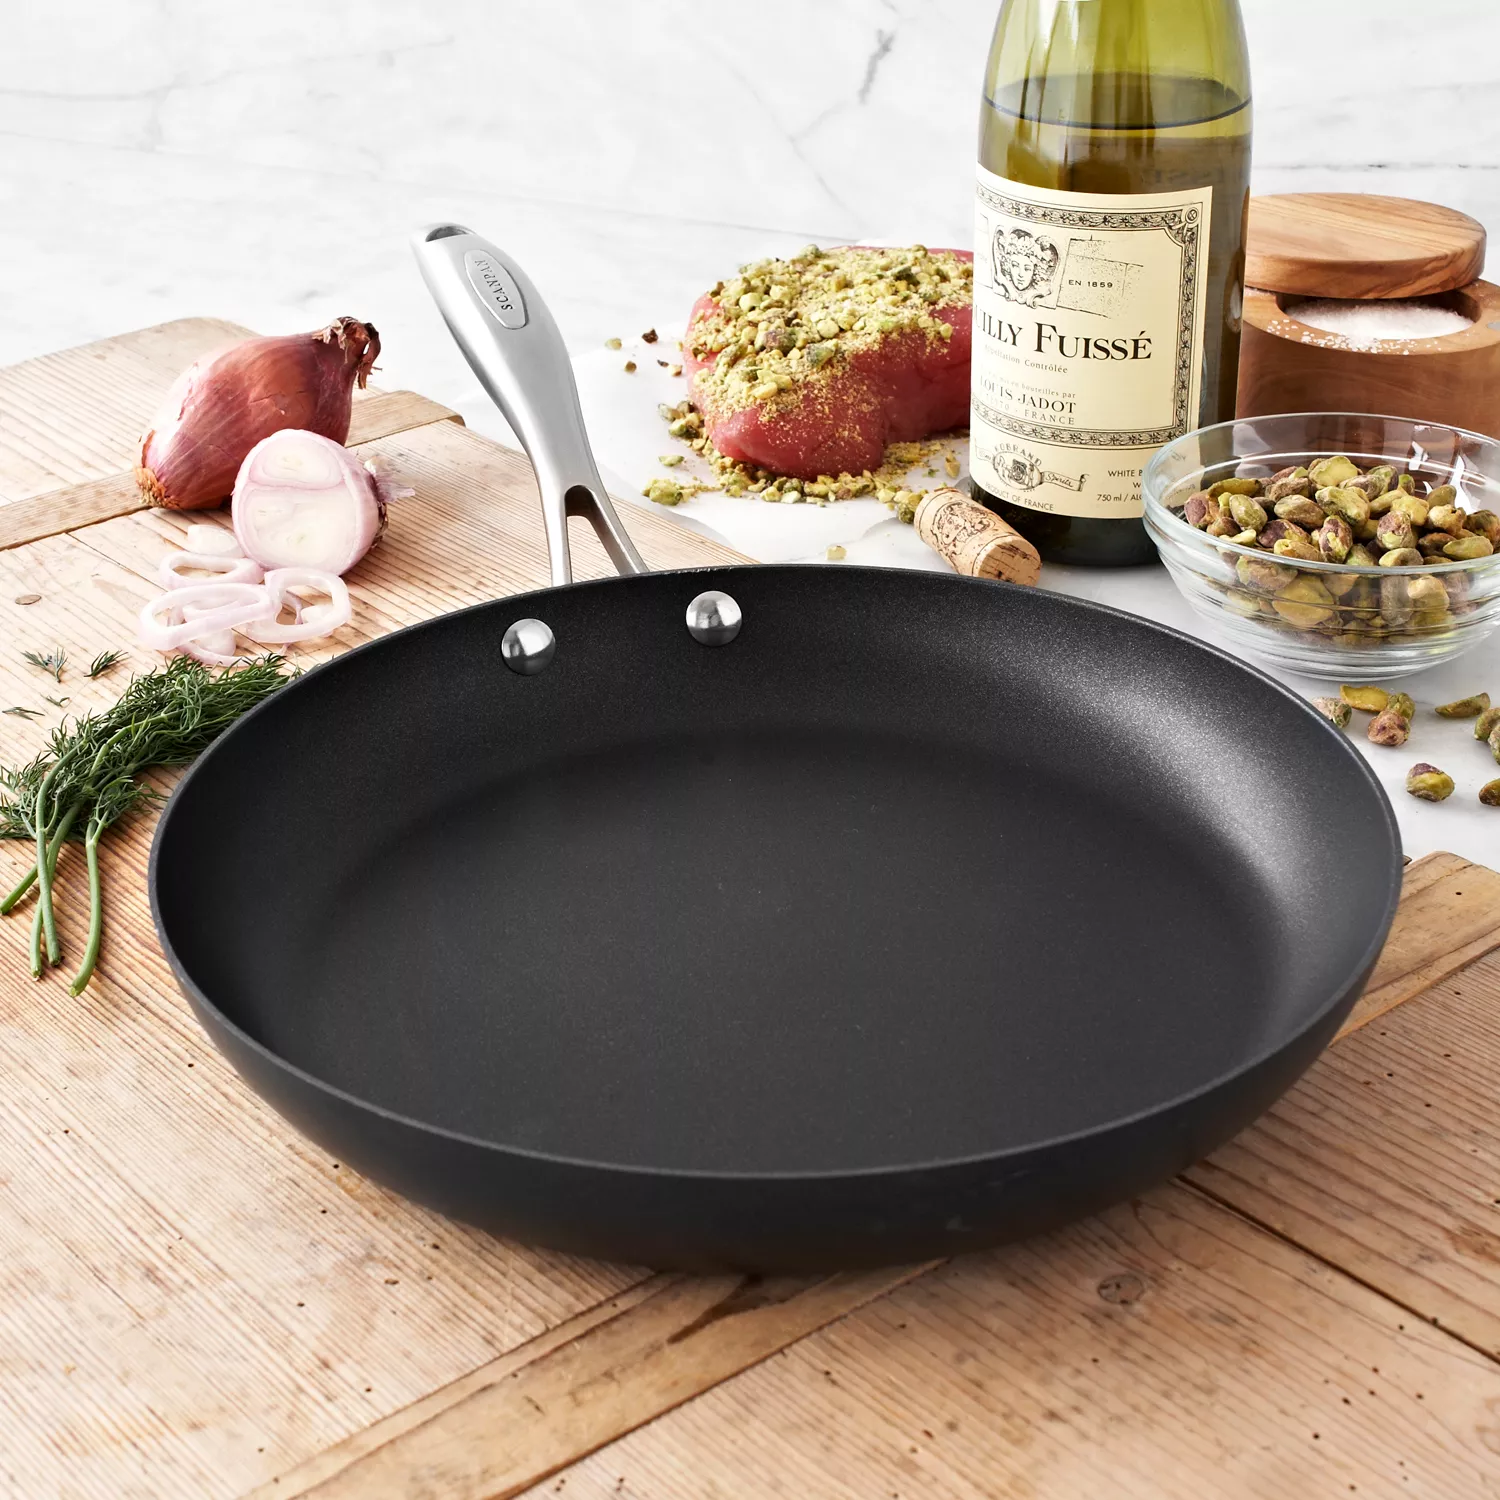 Summer Cooking with Scanpan + Free Skillet